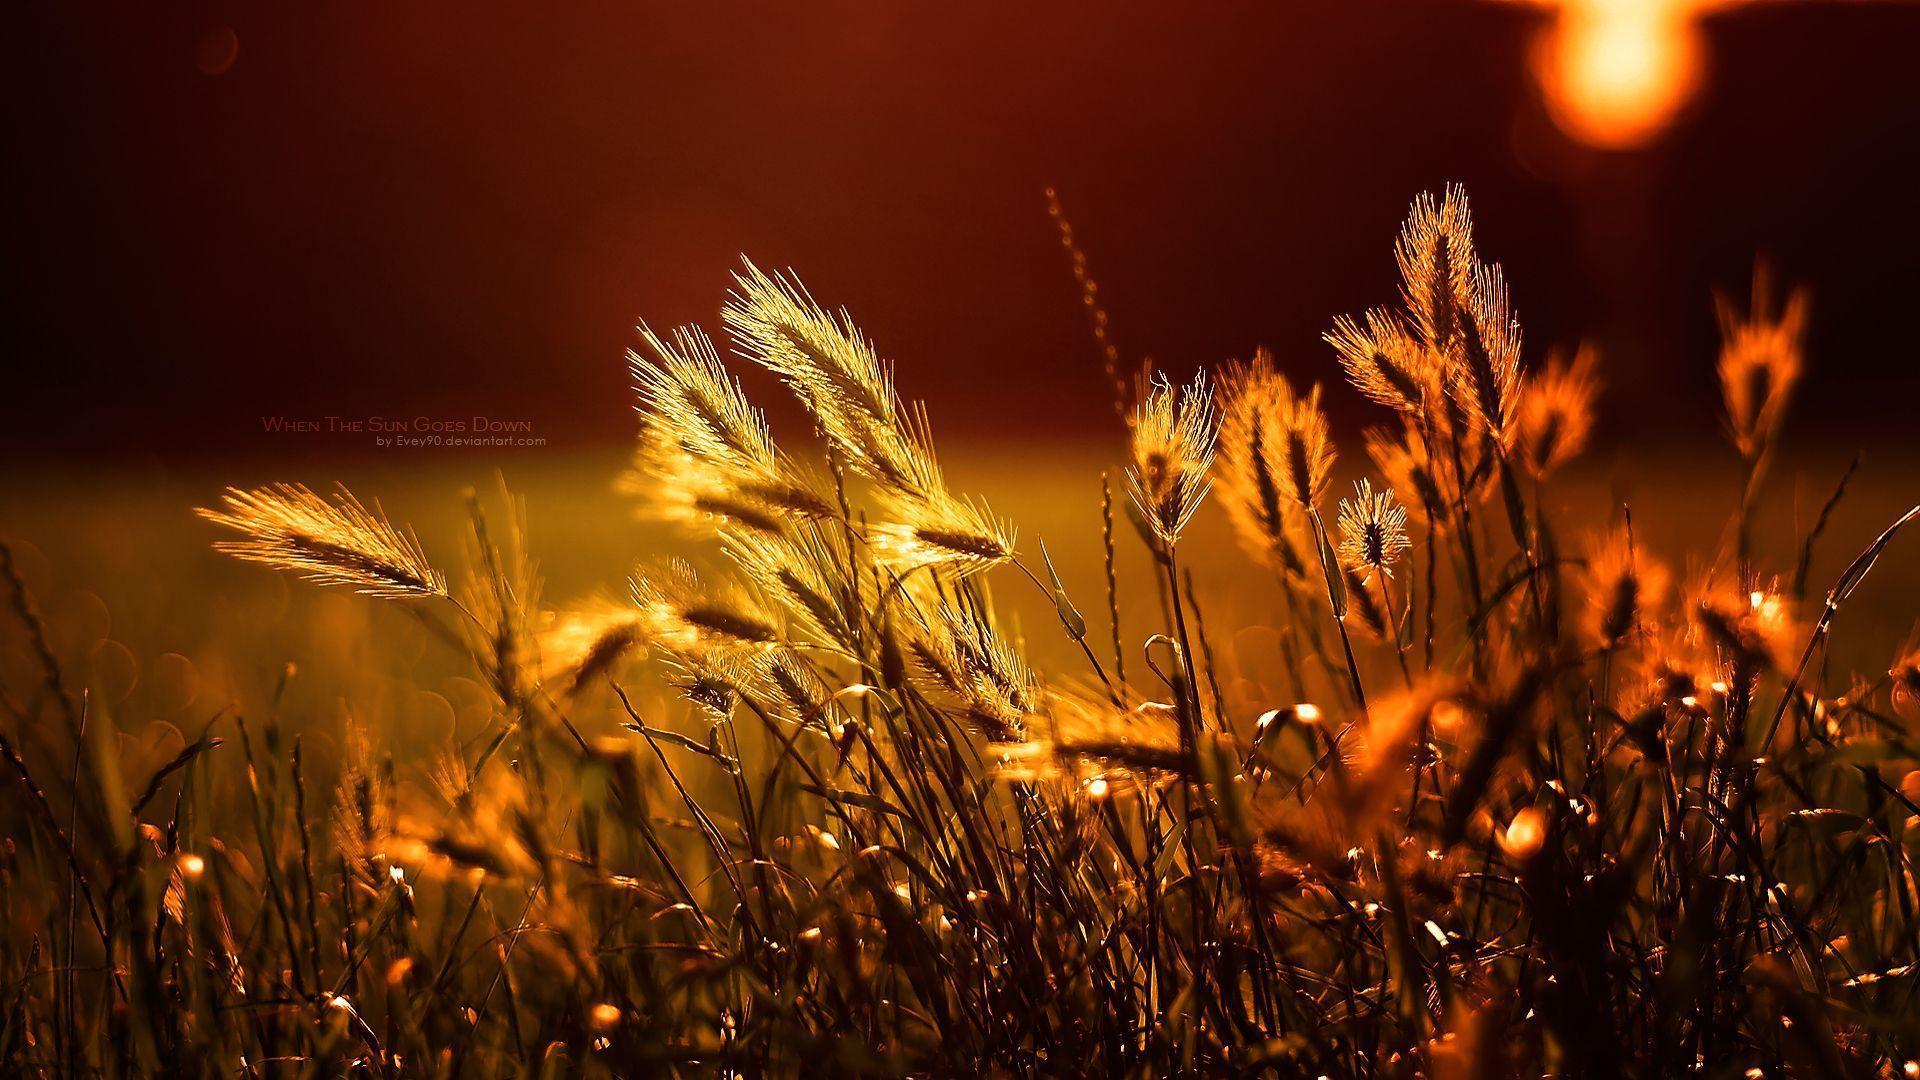 High Definition Collection: Wheat Wallpapers, 35 Full HD Wheat